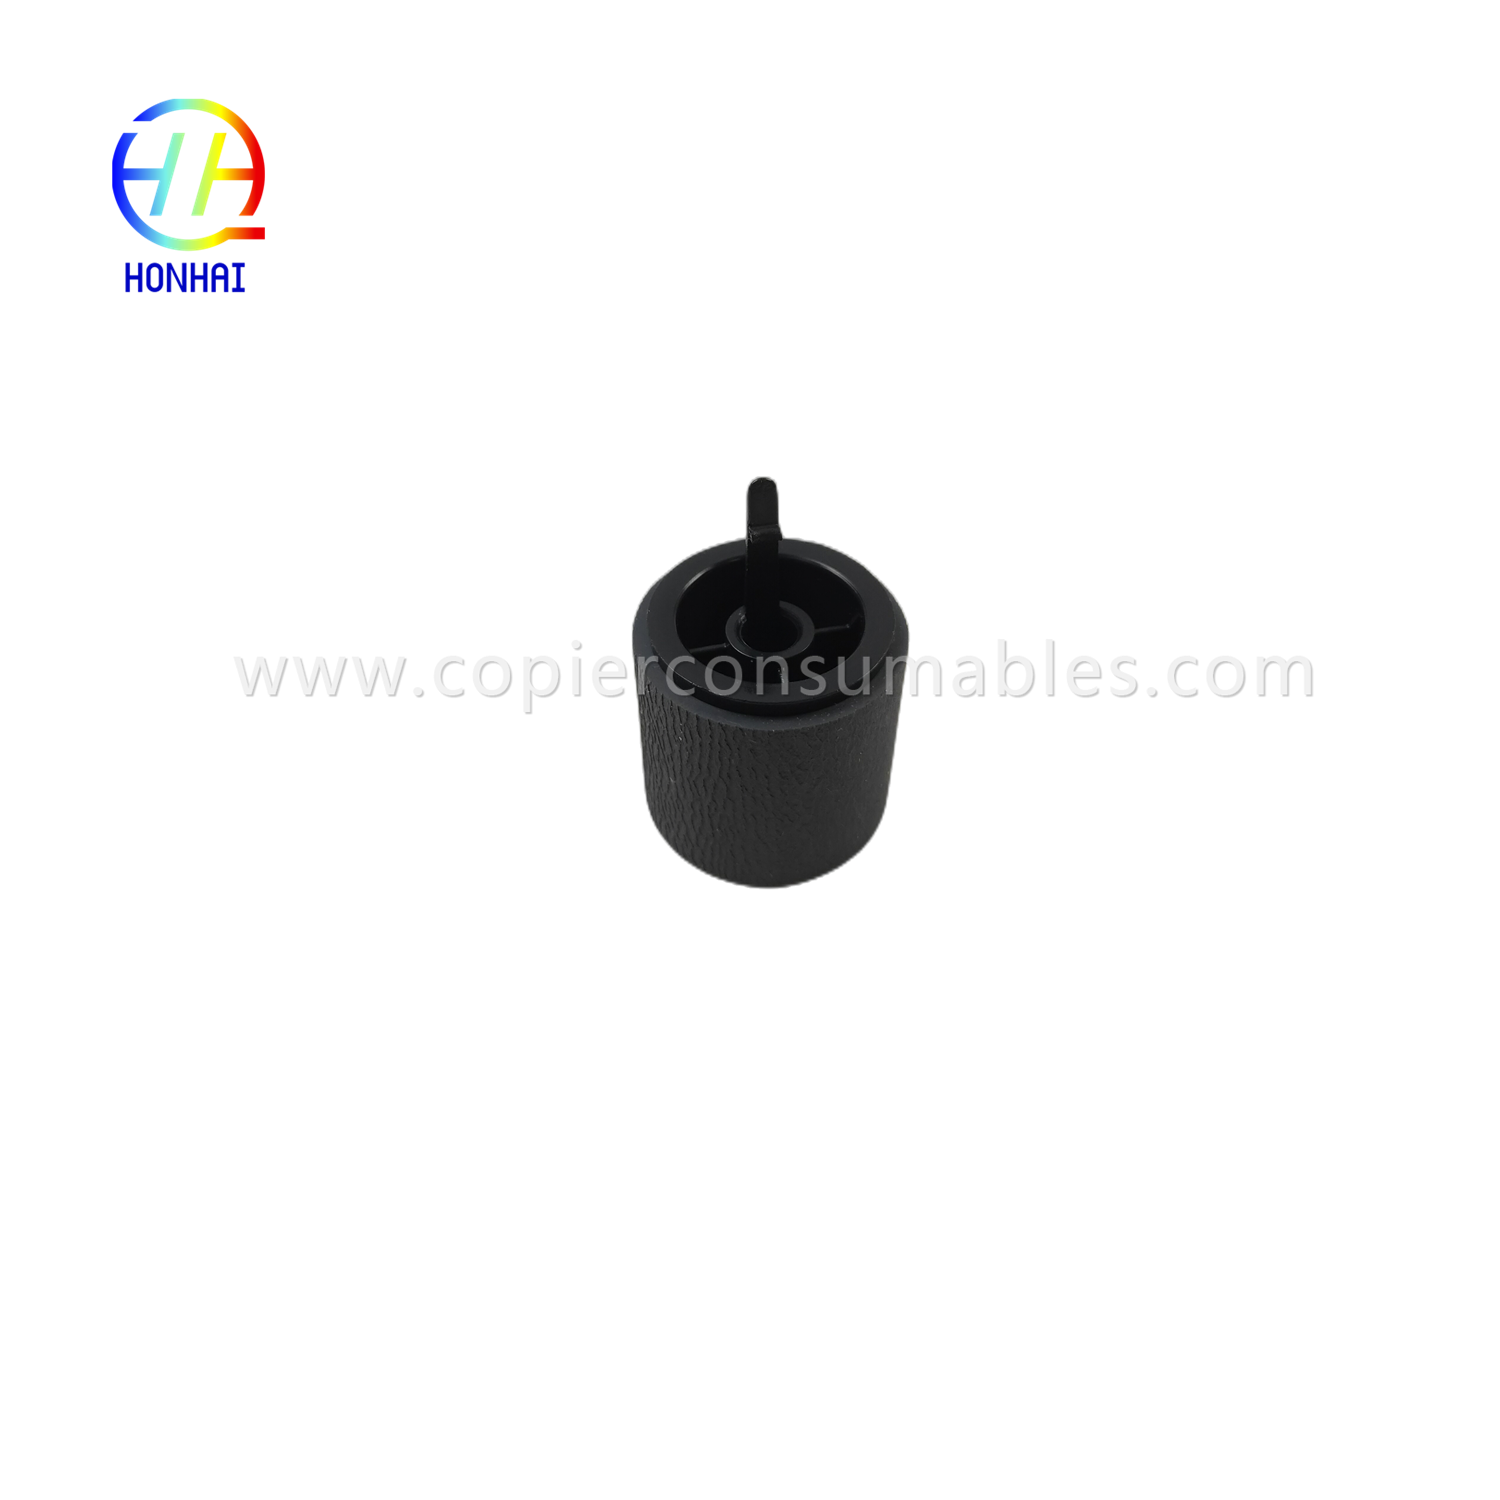 https://www.copierconsumables.com/original-pickup-roller-for-xerox-3315-3320-3325-pickup-feed-roller-130n01677-oem-product/